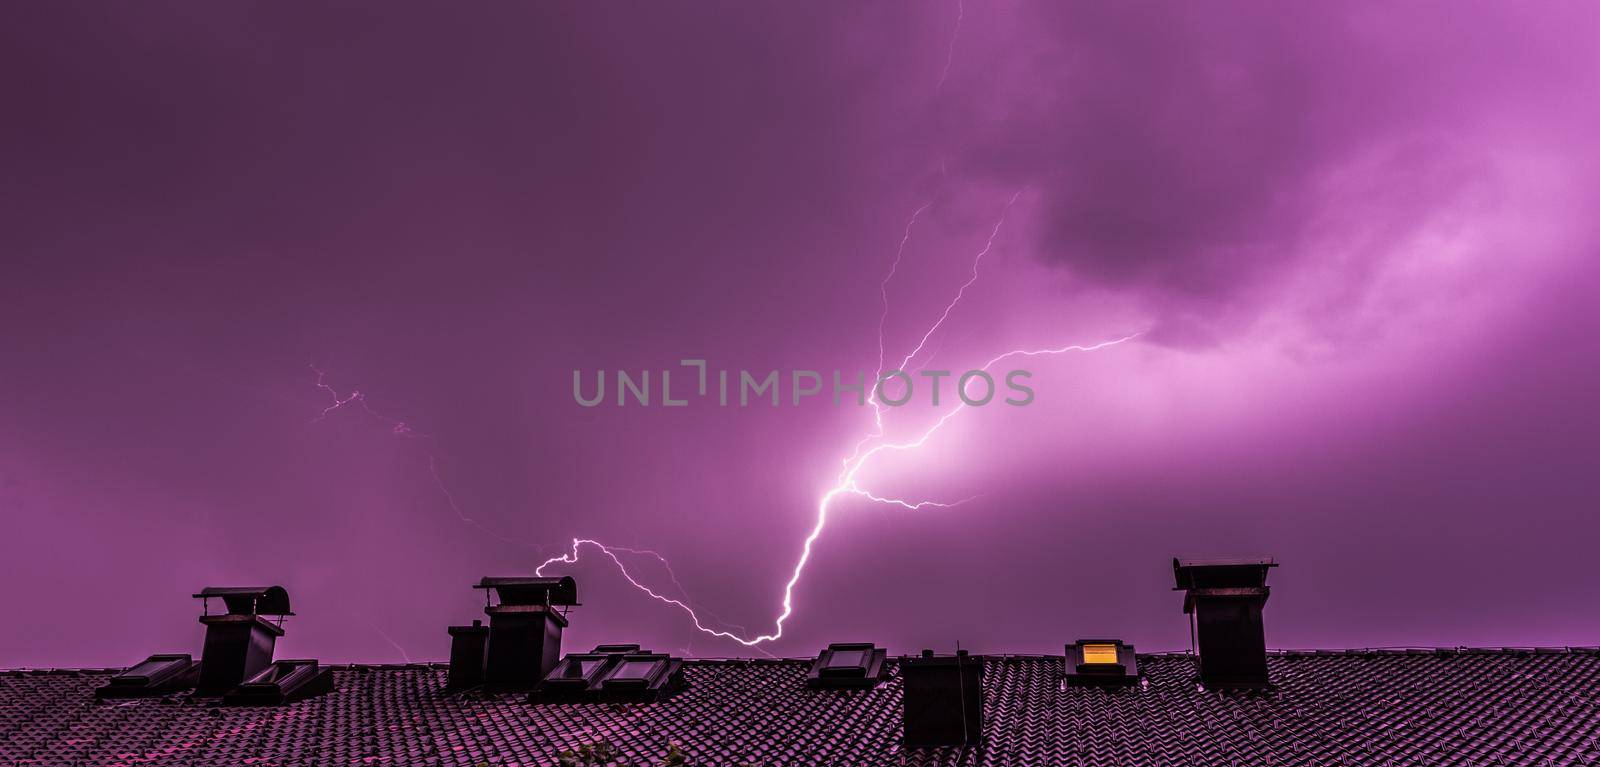 Lightning on the colored sky, roof of a building